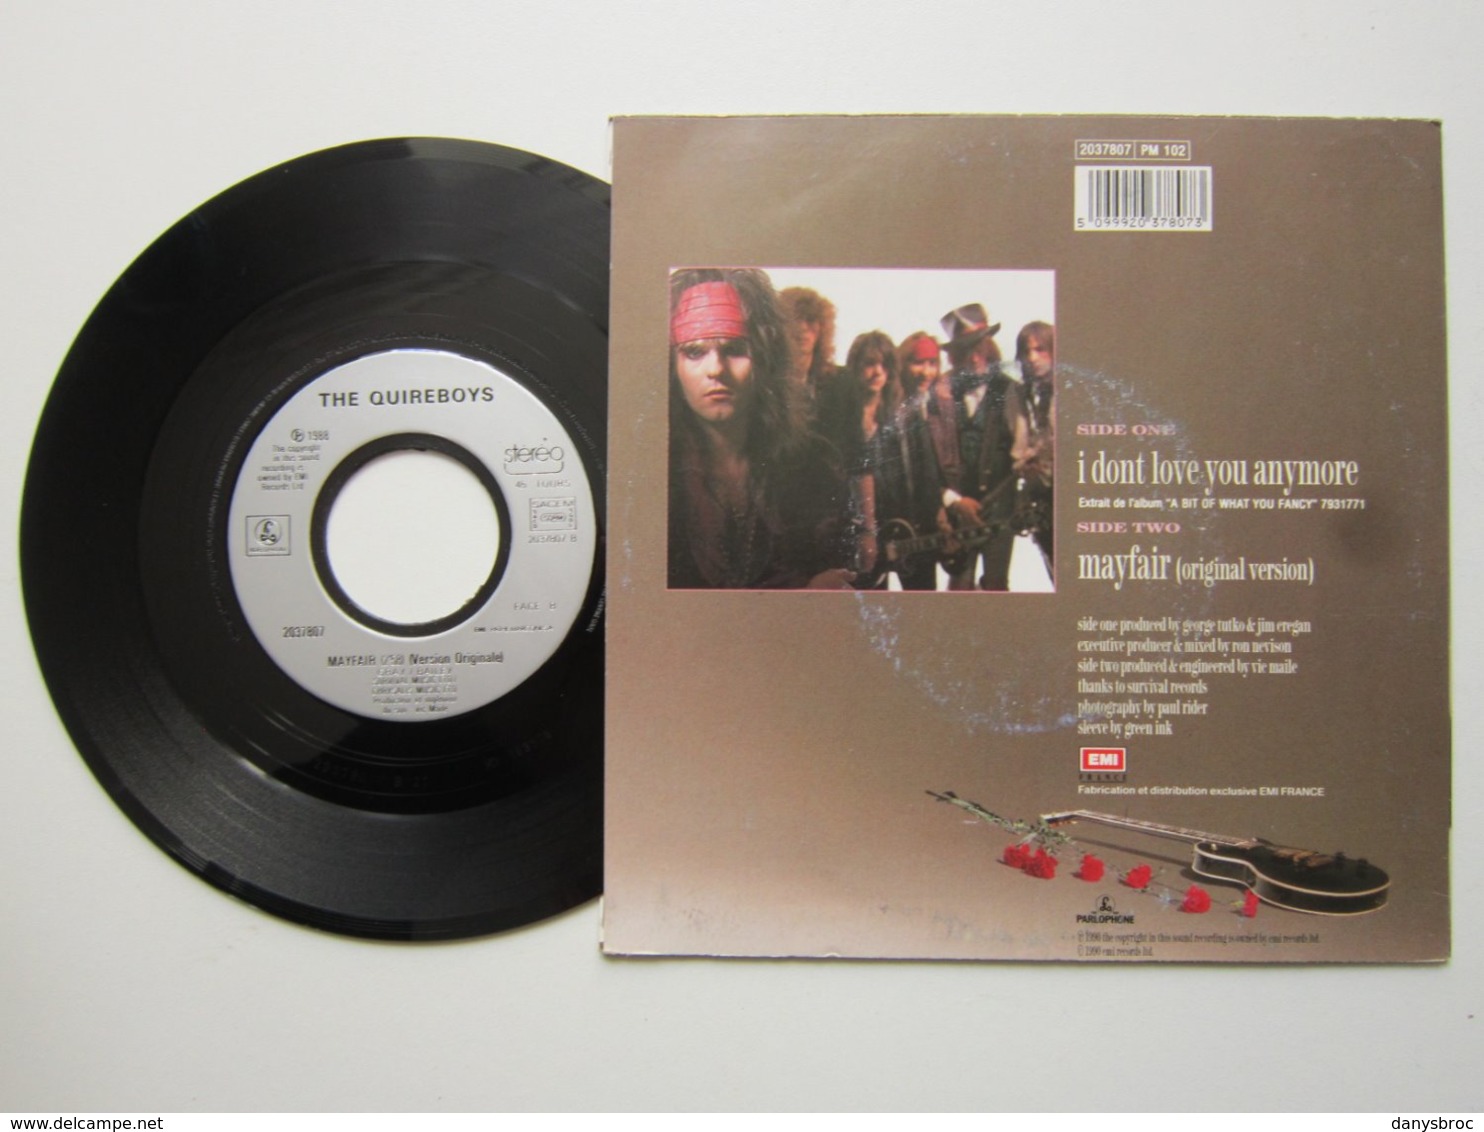 THE QUIREBOYS - I DON'T LOVE YOU ANYMORE - MAYFAIR (V.O) - Disque Vinyle 45t SACEM 1988 - Other - English Music